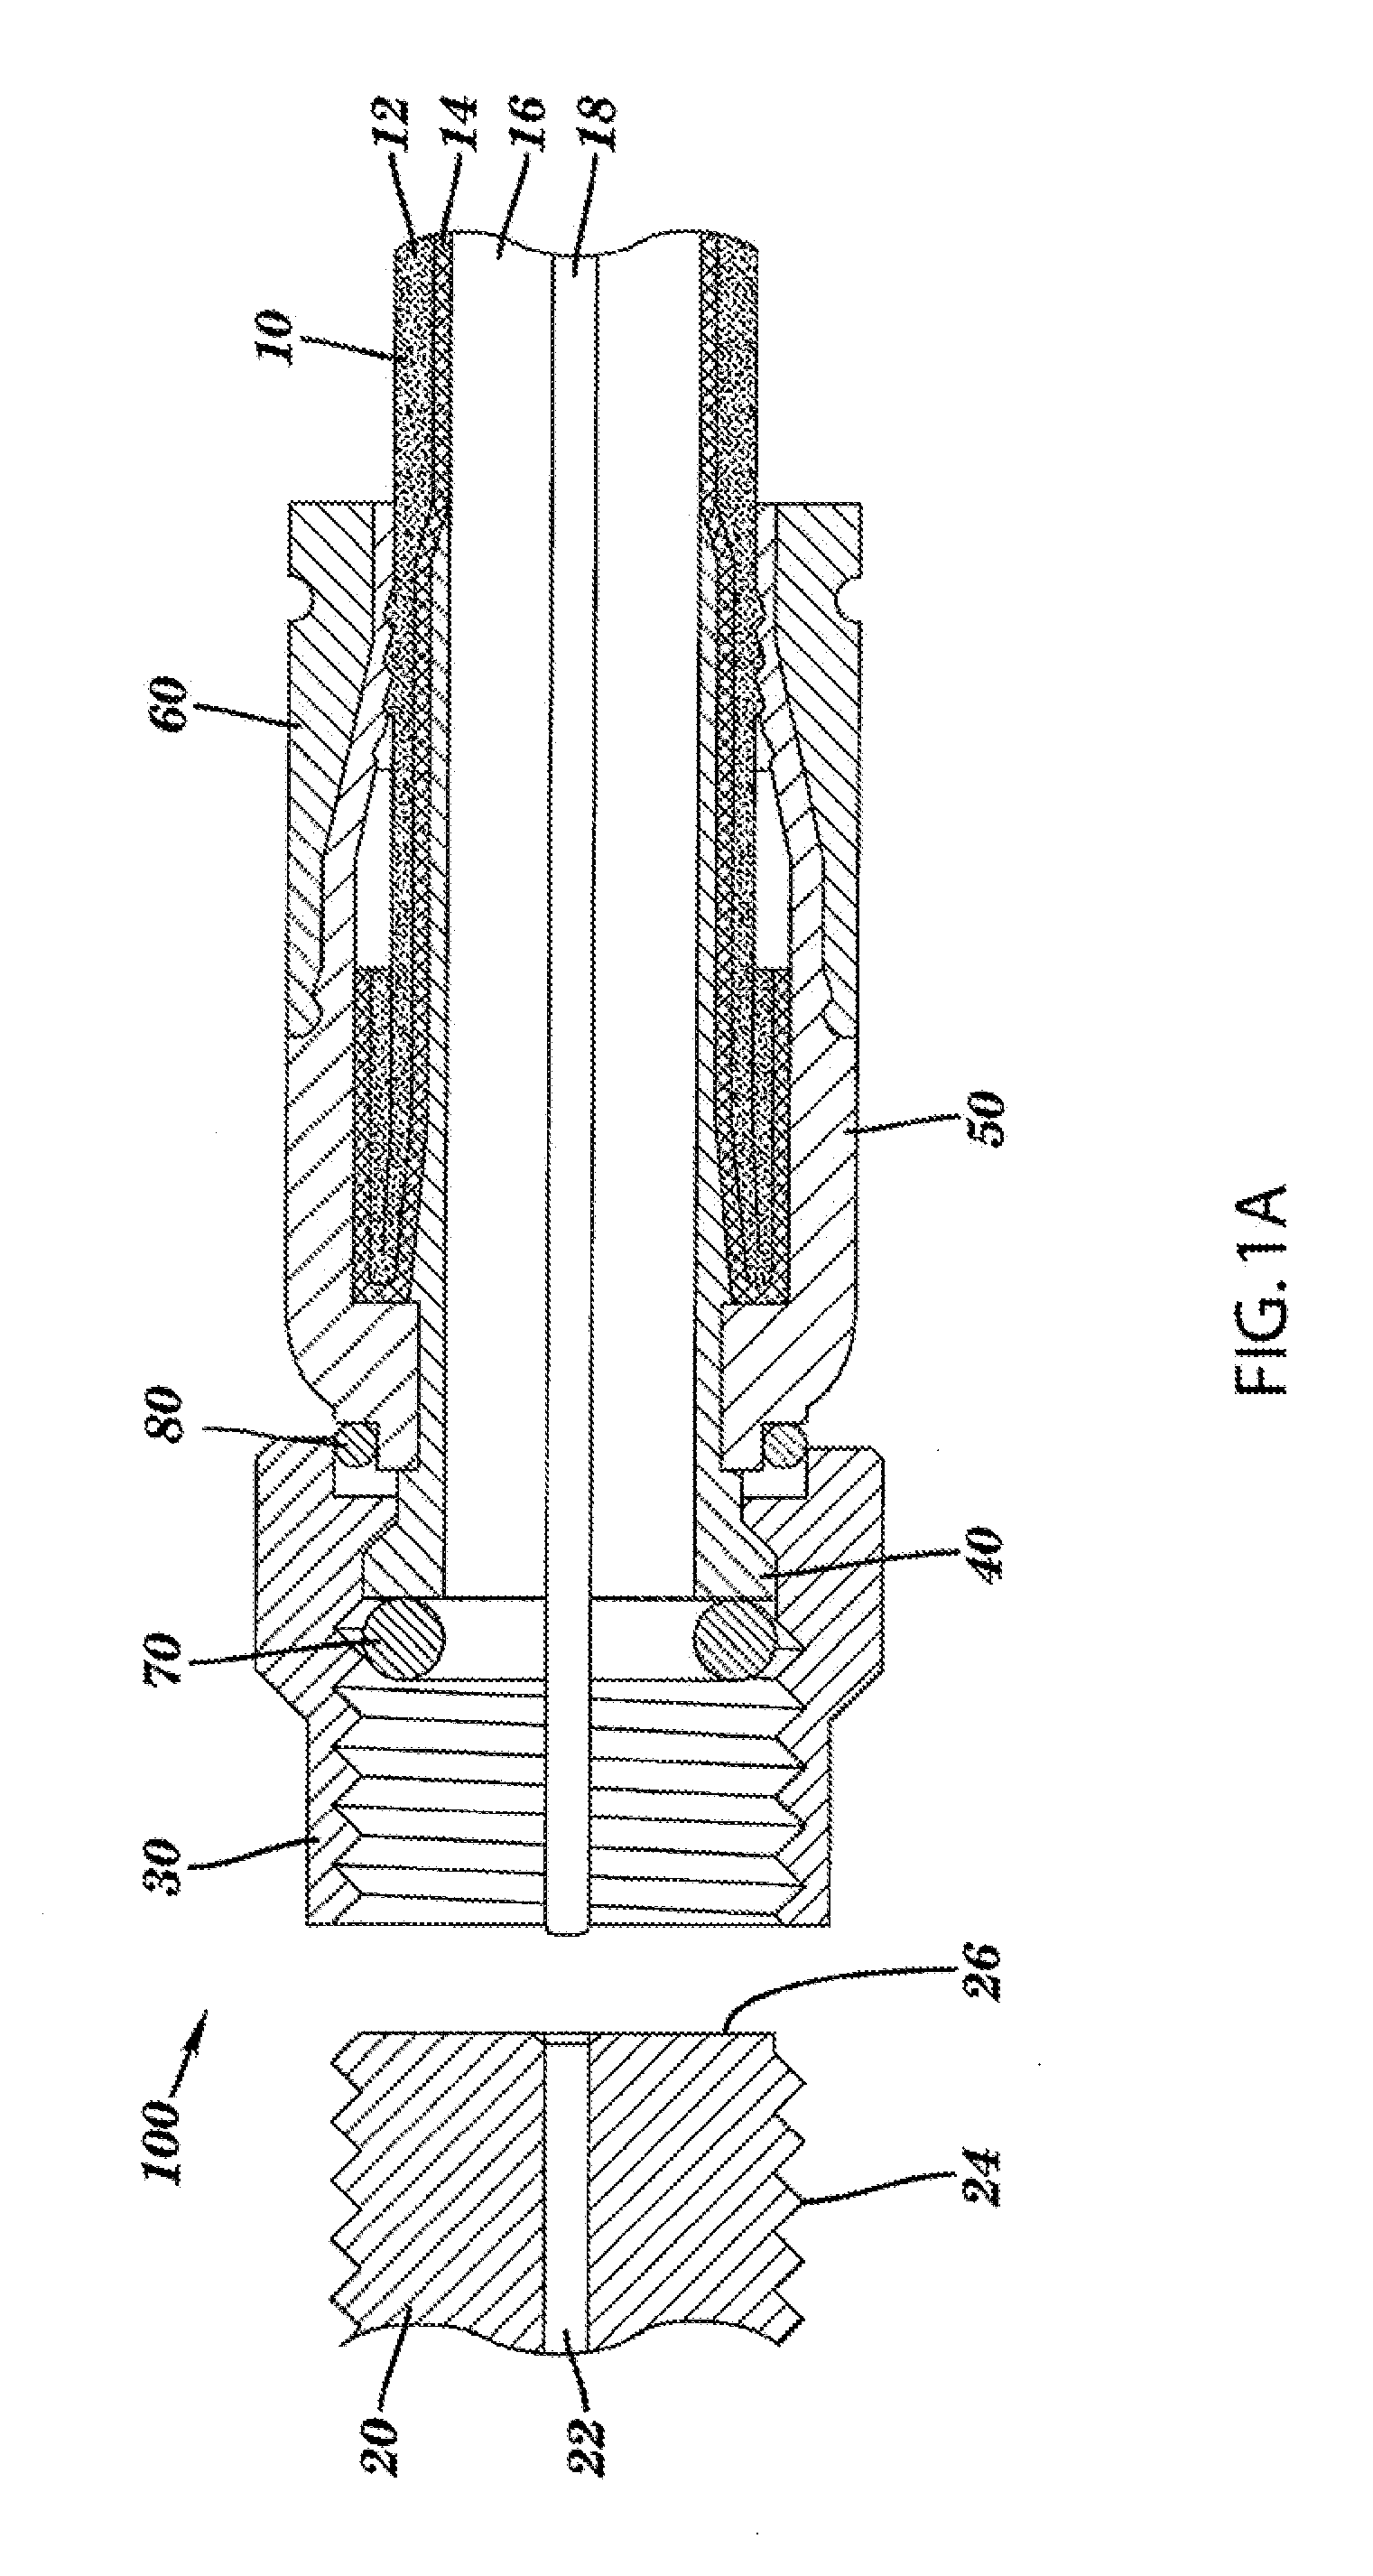 Connector having a conductively coated member and method of use thereof